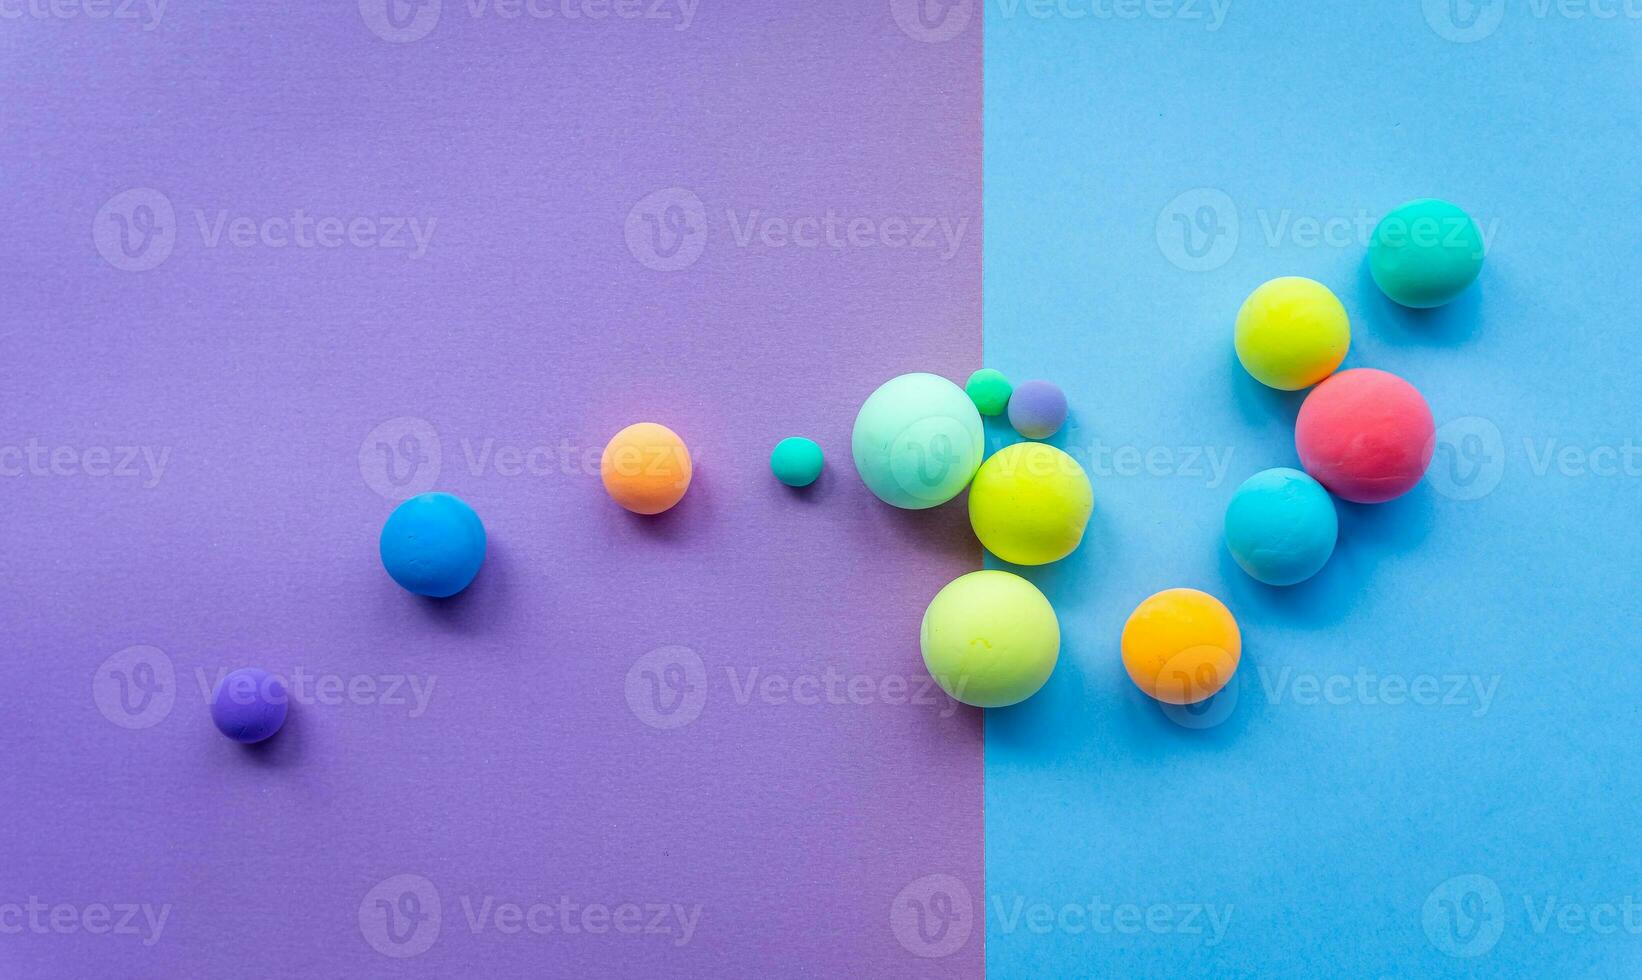 Colorful abstract figures made of plasticine, Balls of different sizes. Funny illustration for the background of children's holidays, frame for text photo